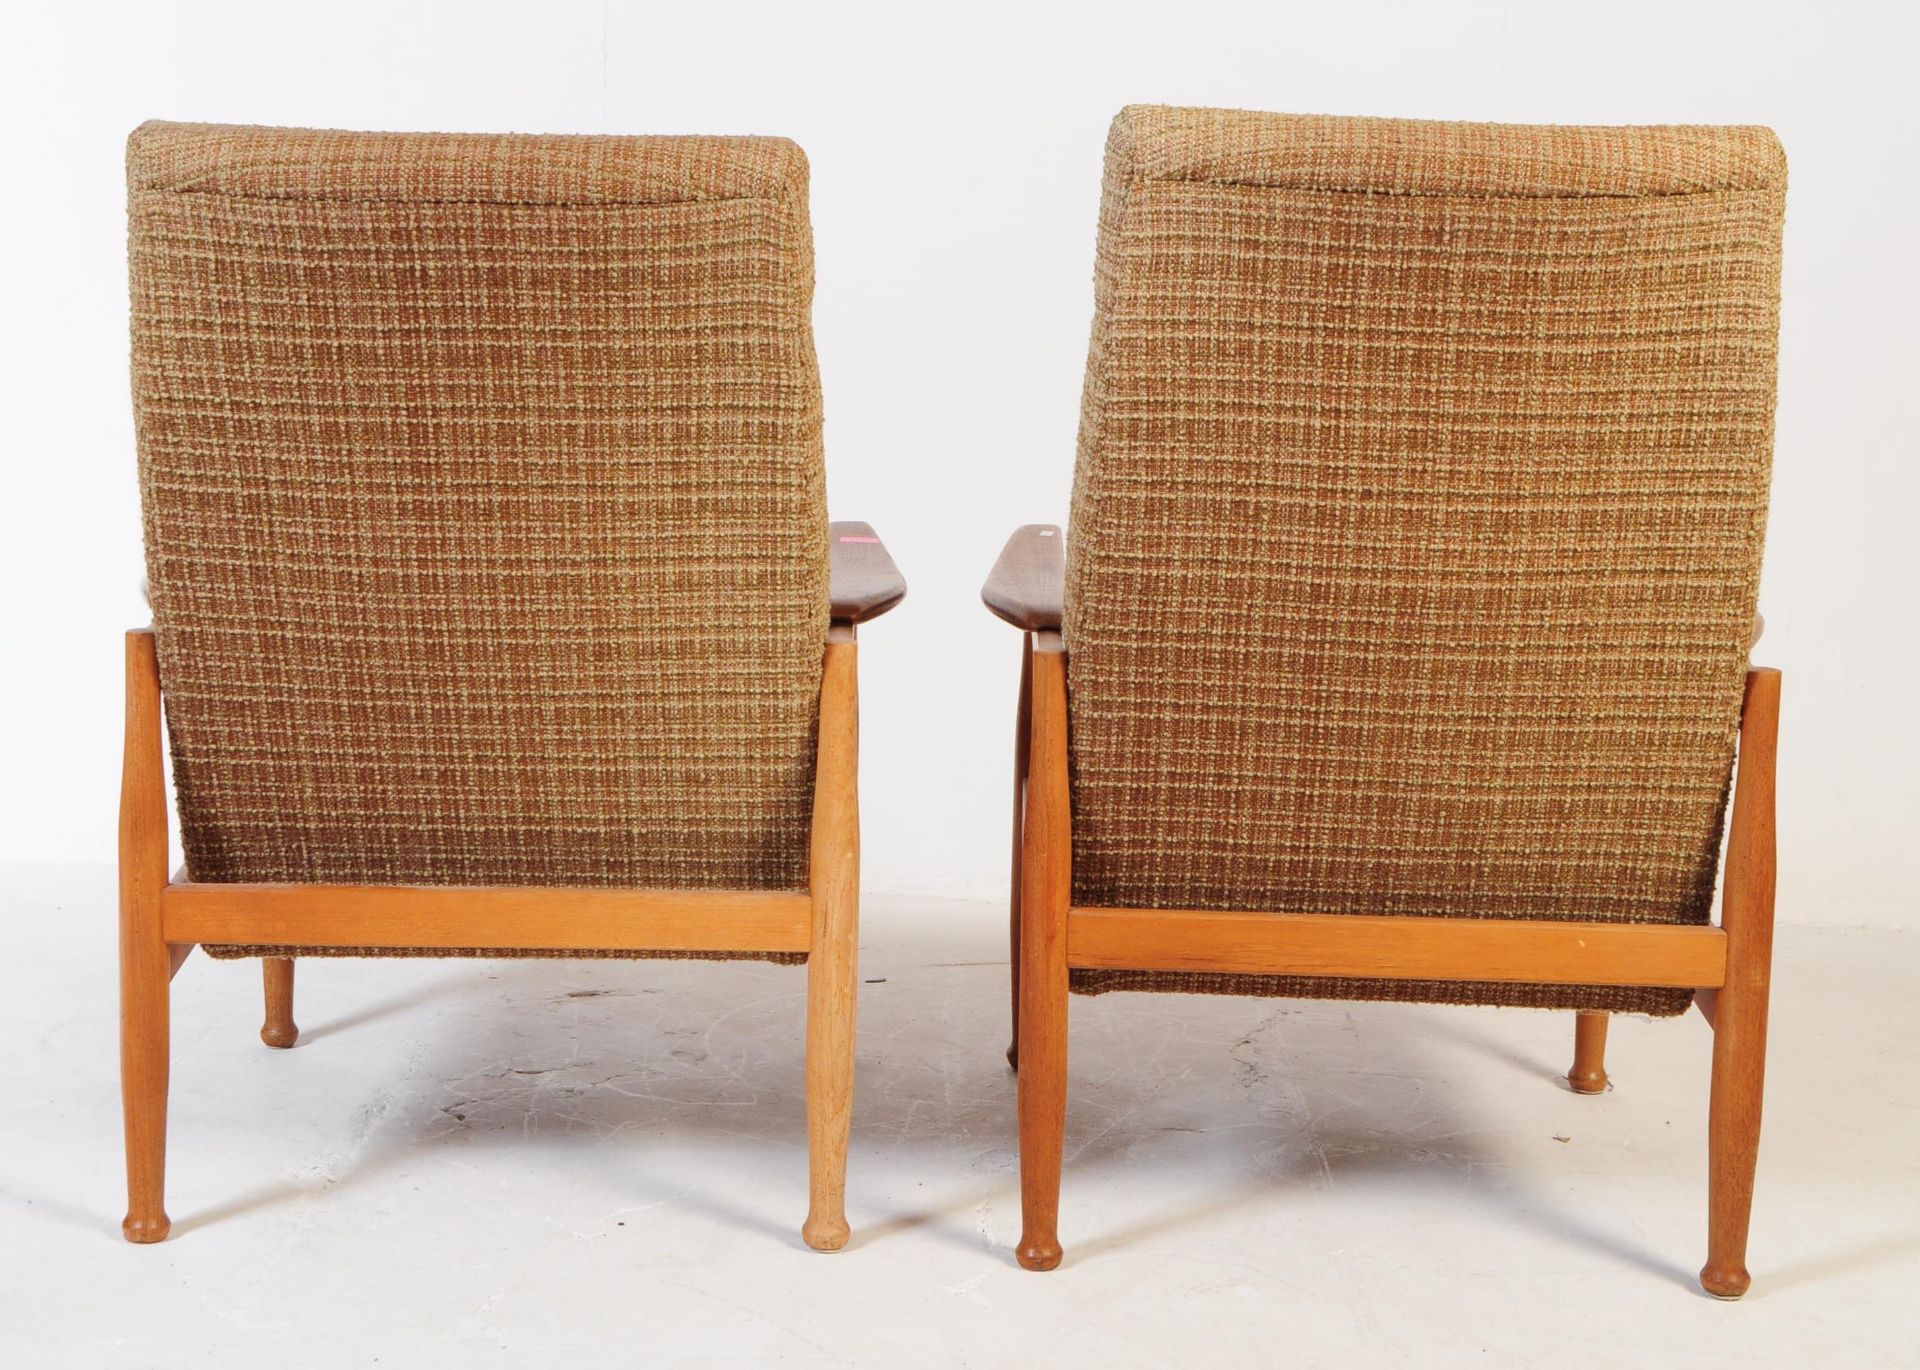 PARKER KNOLL - PAIR OF RETRO MID 20TH CENTURY ARMCHAIRS - Image 3 of 7